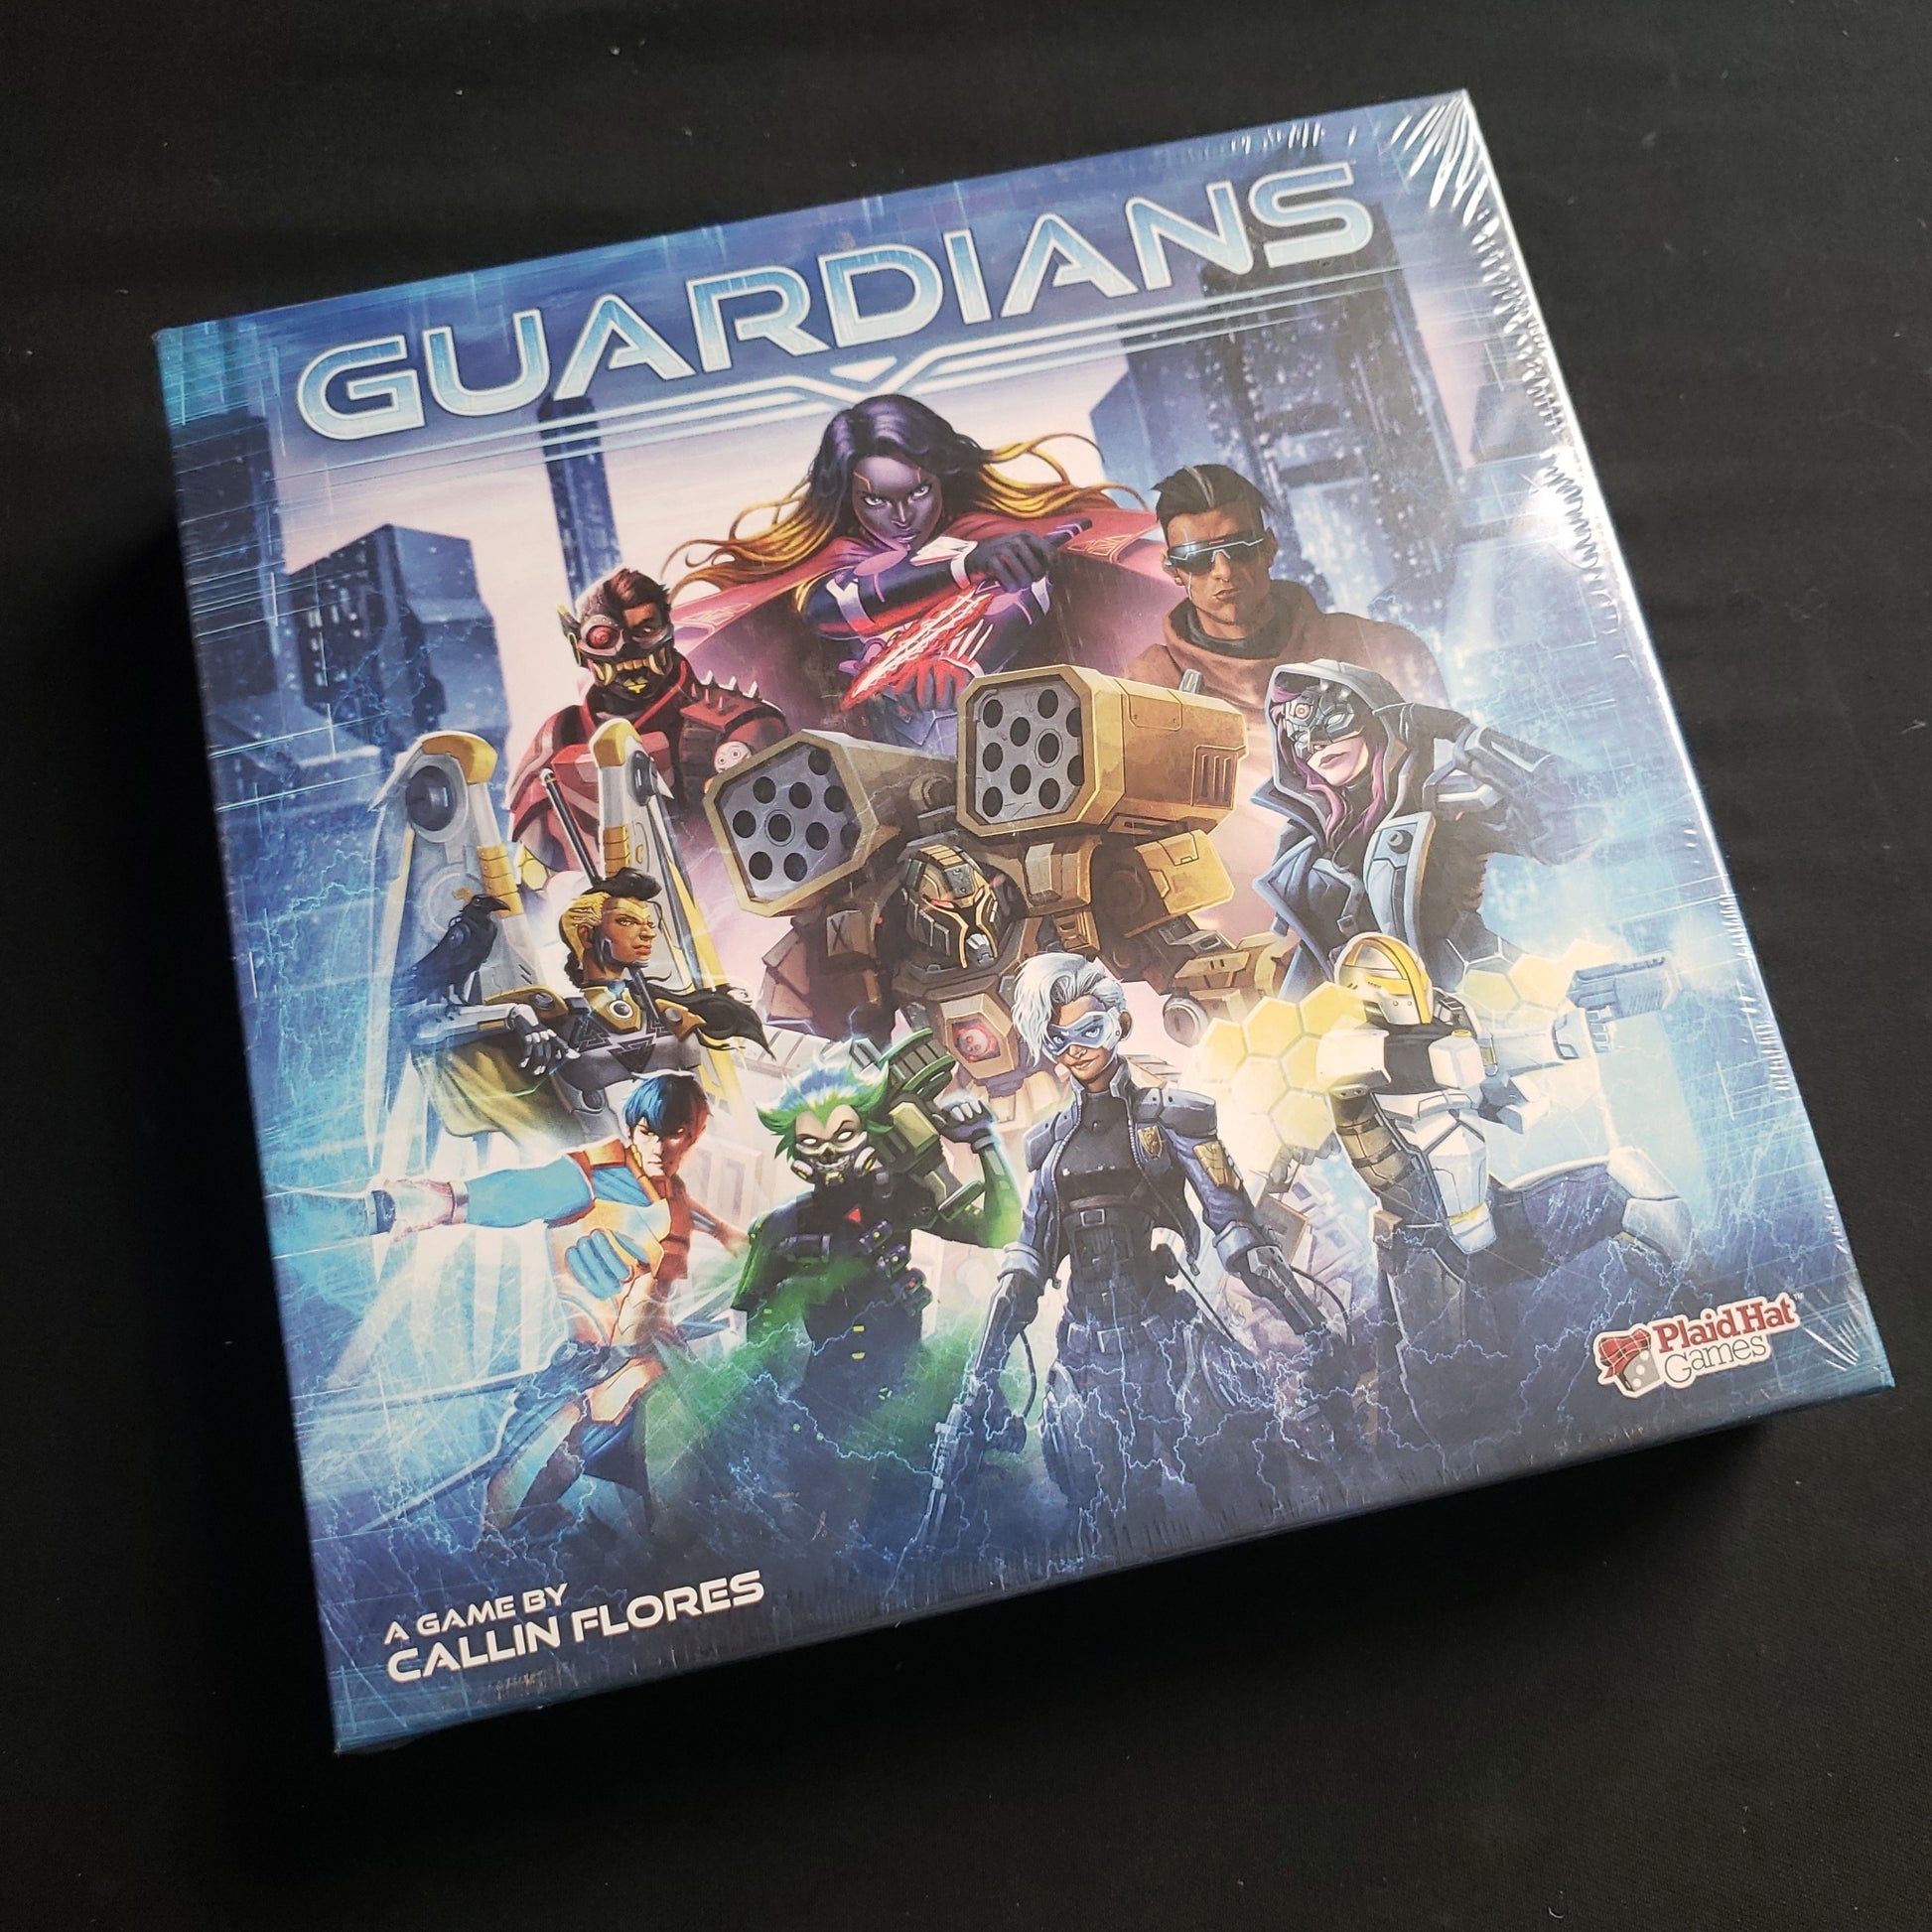 Image shows the front cover of the box of the Guardians card game